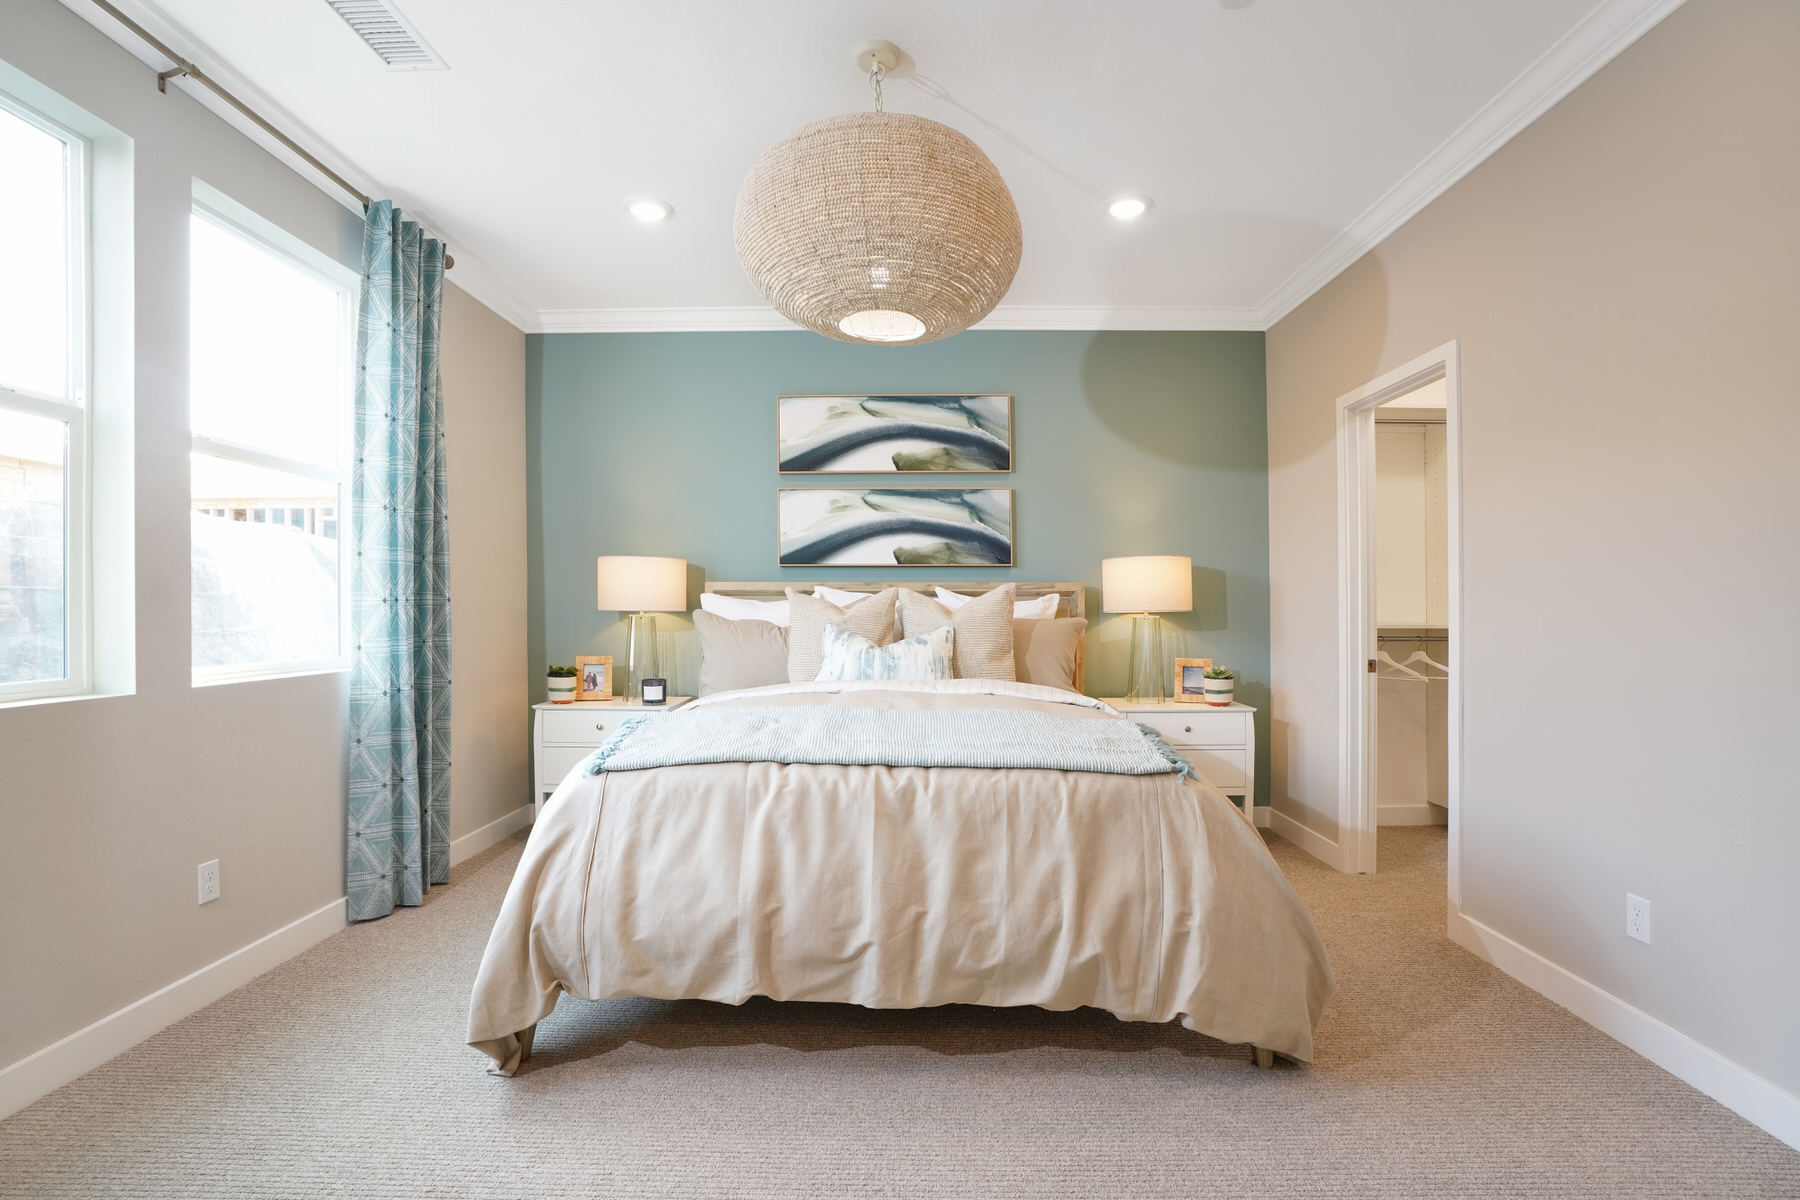 Primary Bedroom in Plan 2 at Townes at Magnolia by Melia Homes in Anaheim, CA